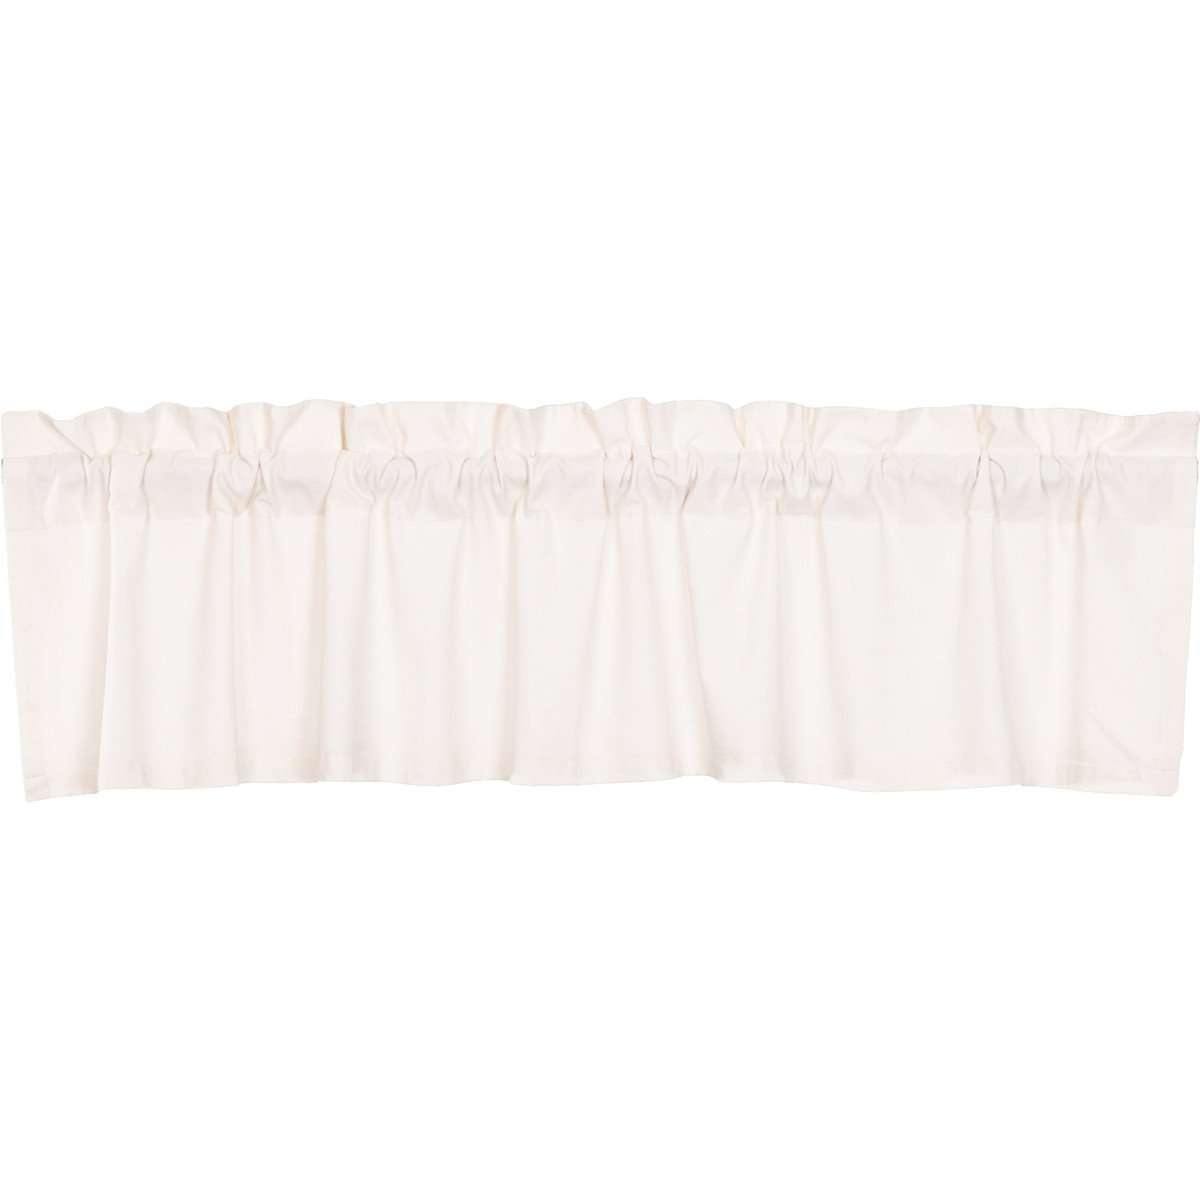 Simple Life Flax Antique White Valance Curtain 16x72 VHC Brands - The Fox Decor